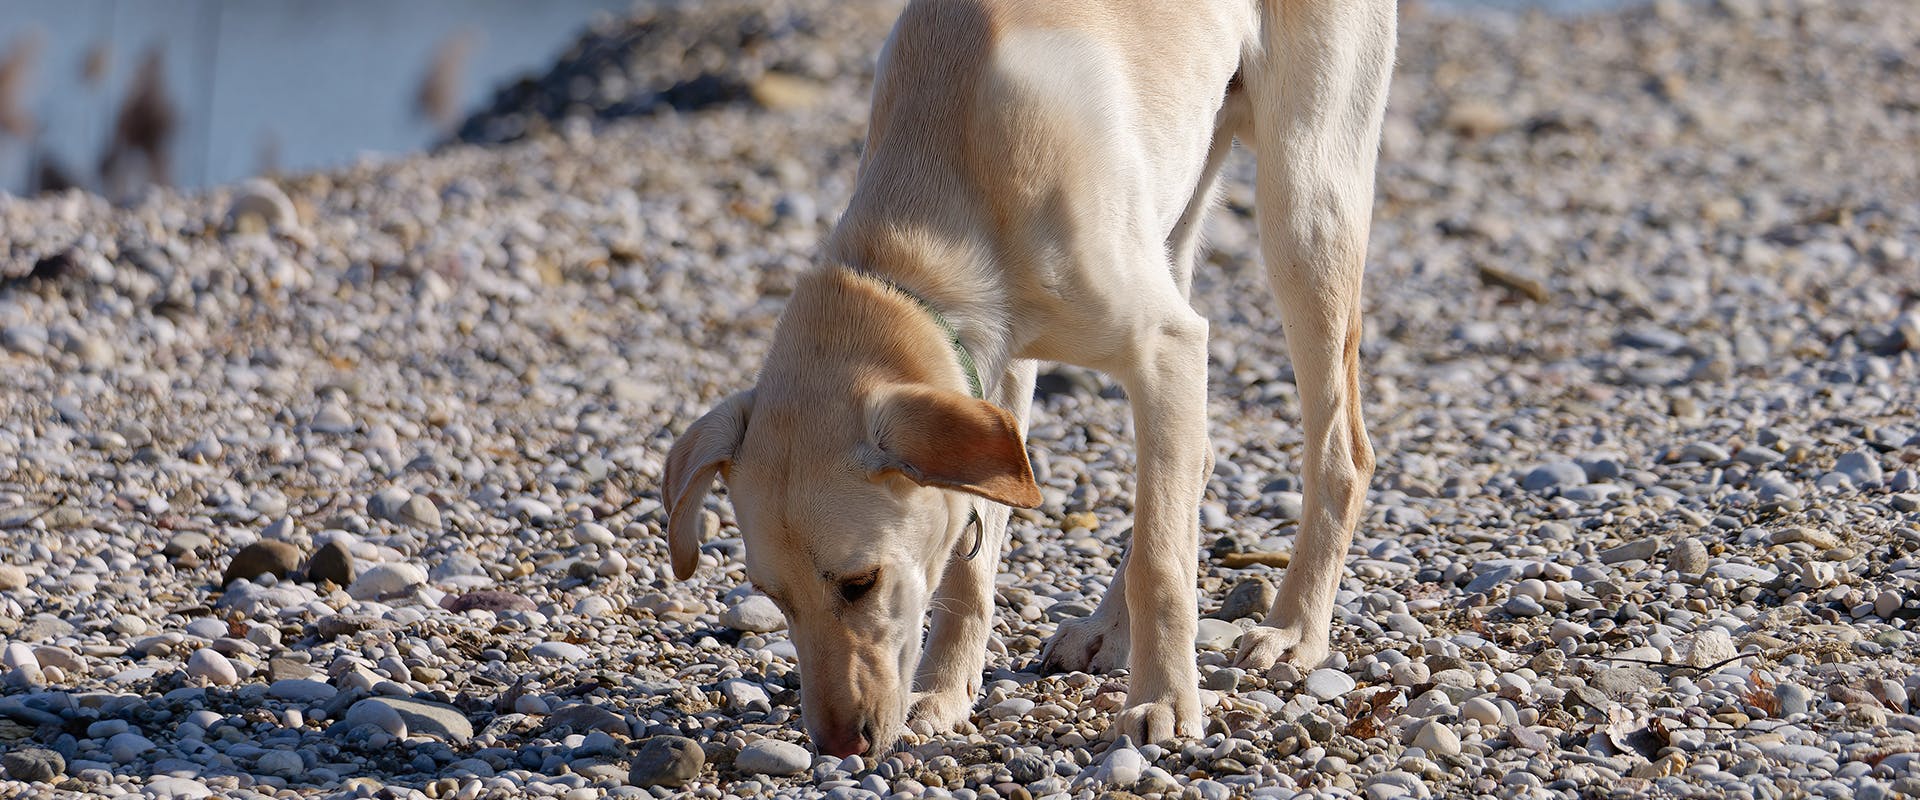 A dog walking and sniffing along a beach